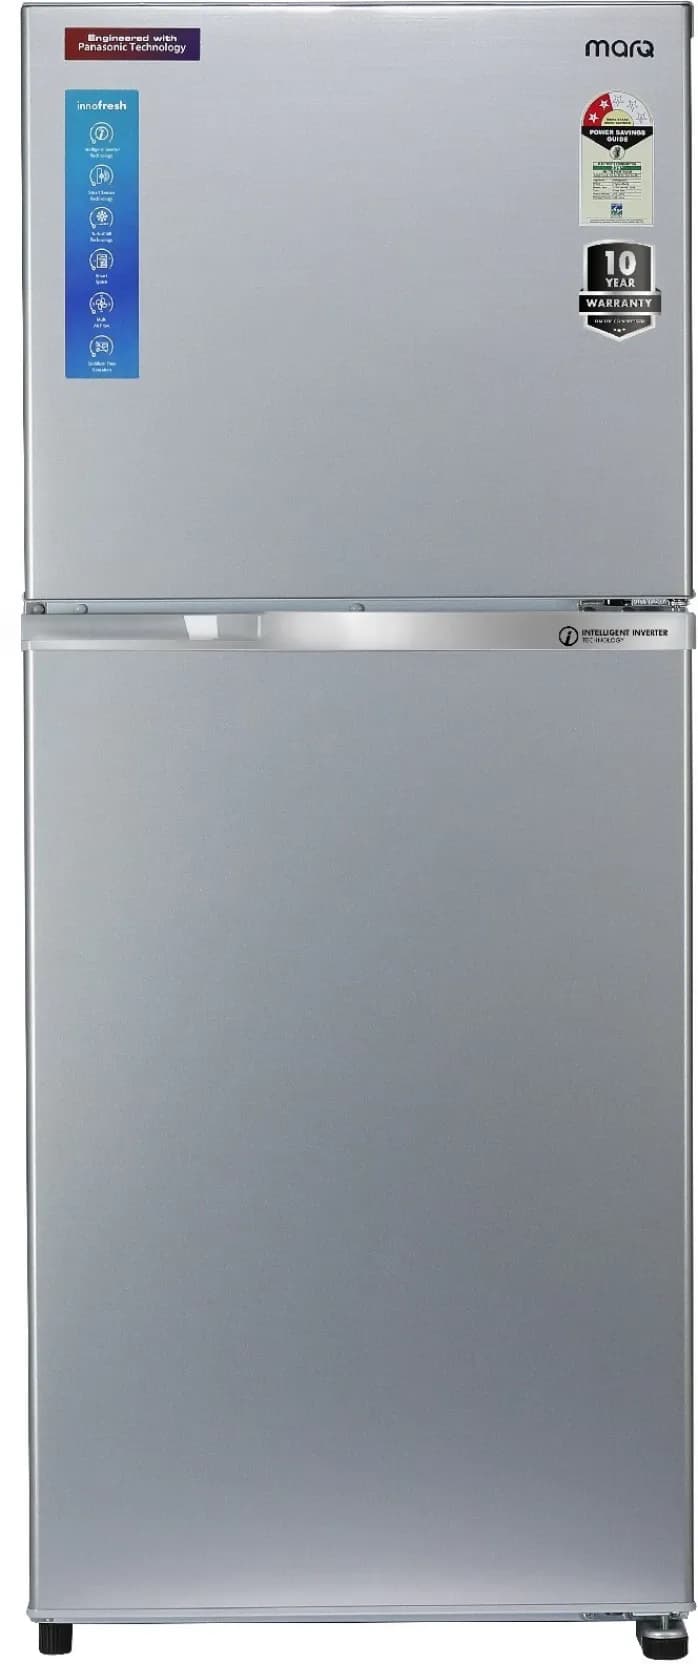 MarQ 310JF3MQDS 308 Ltr Double Door Refrigerator